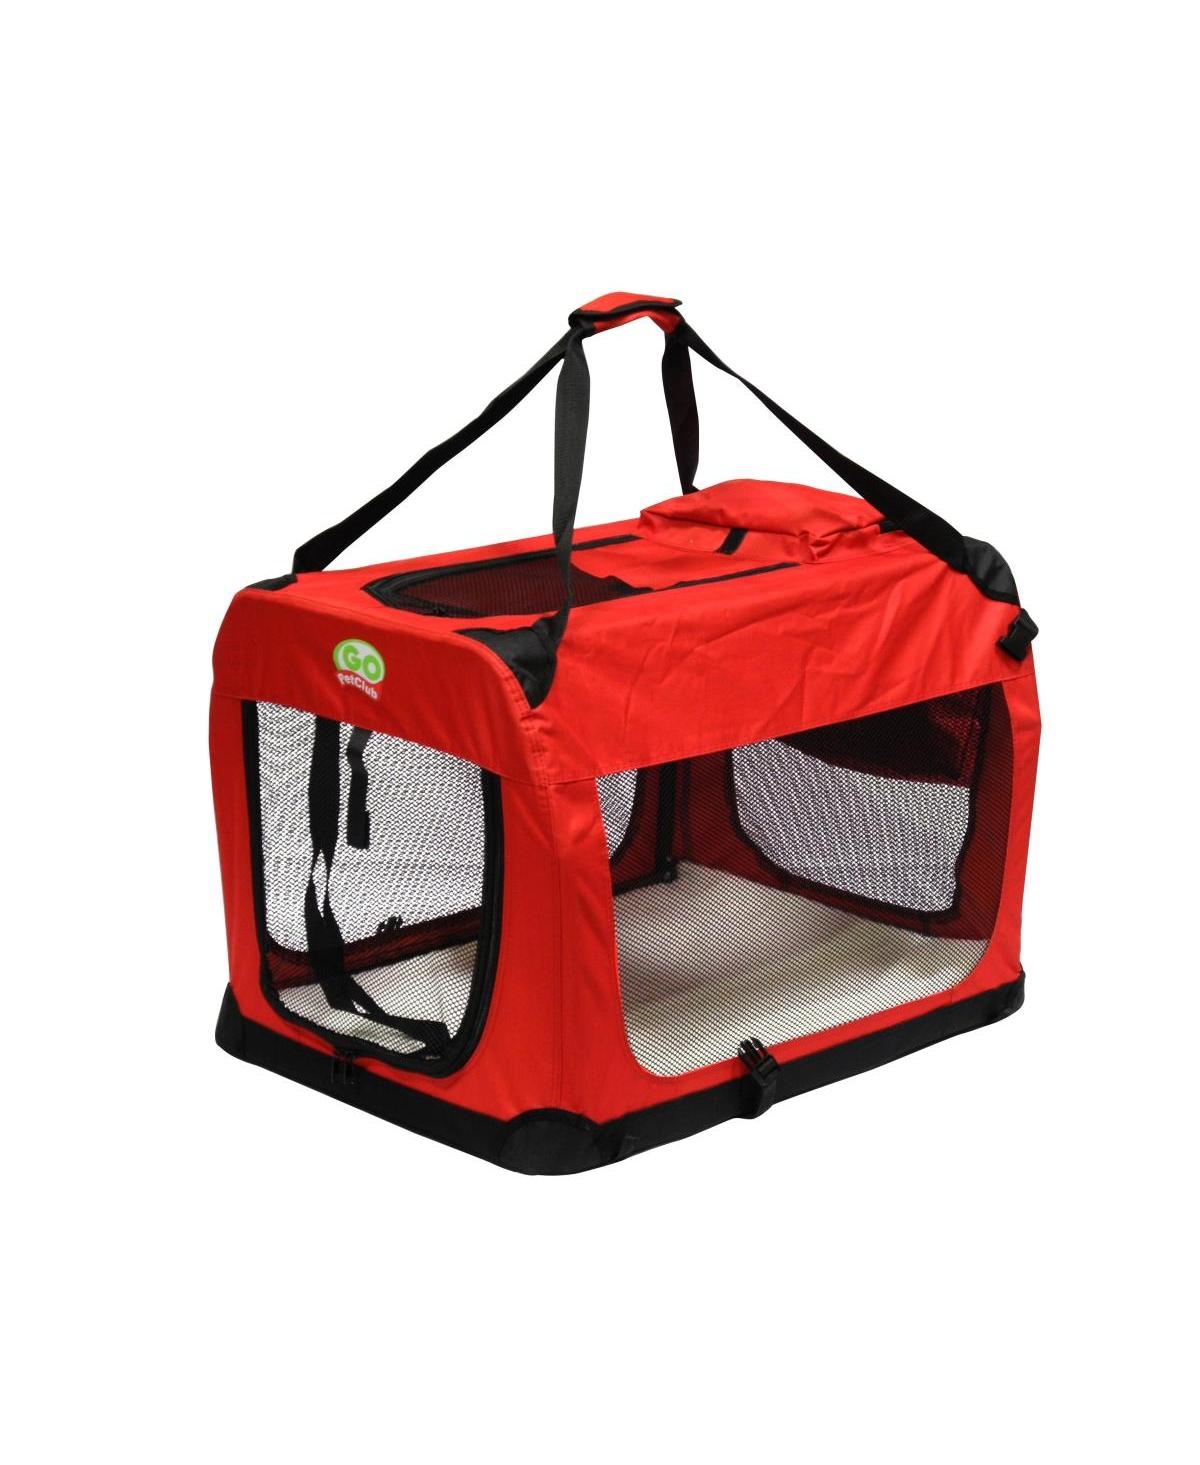 Cp-20 13 in. Foldable Pet Crate, Red - Open miscellaneous